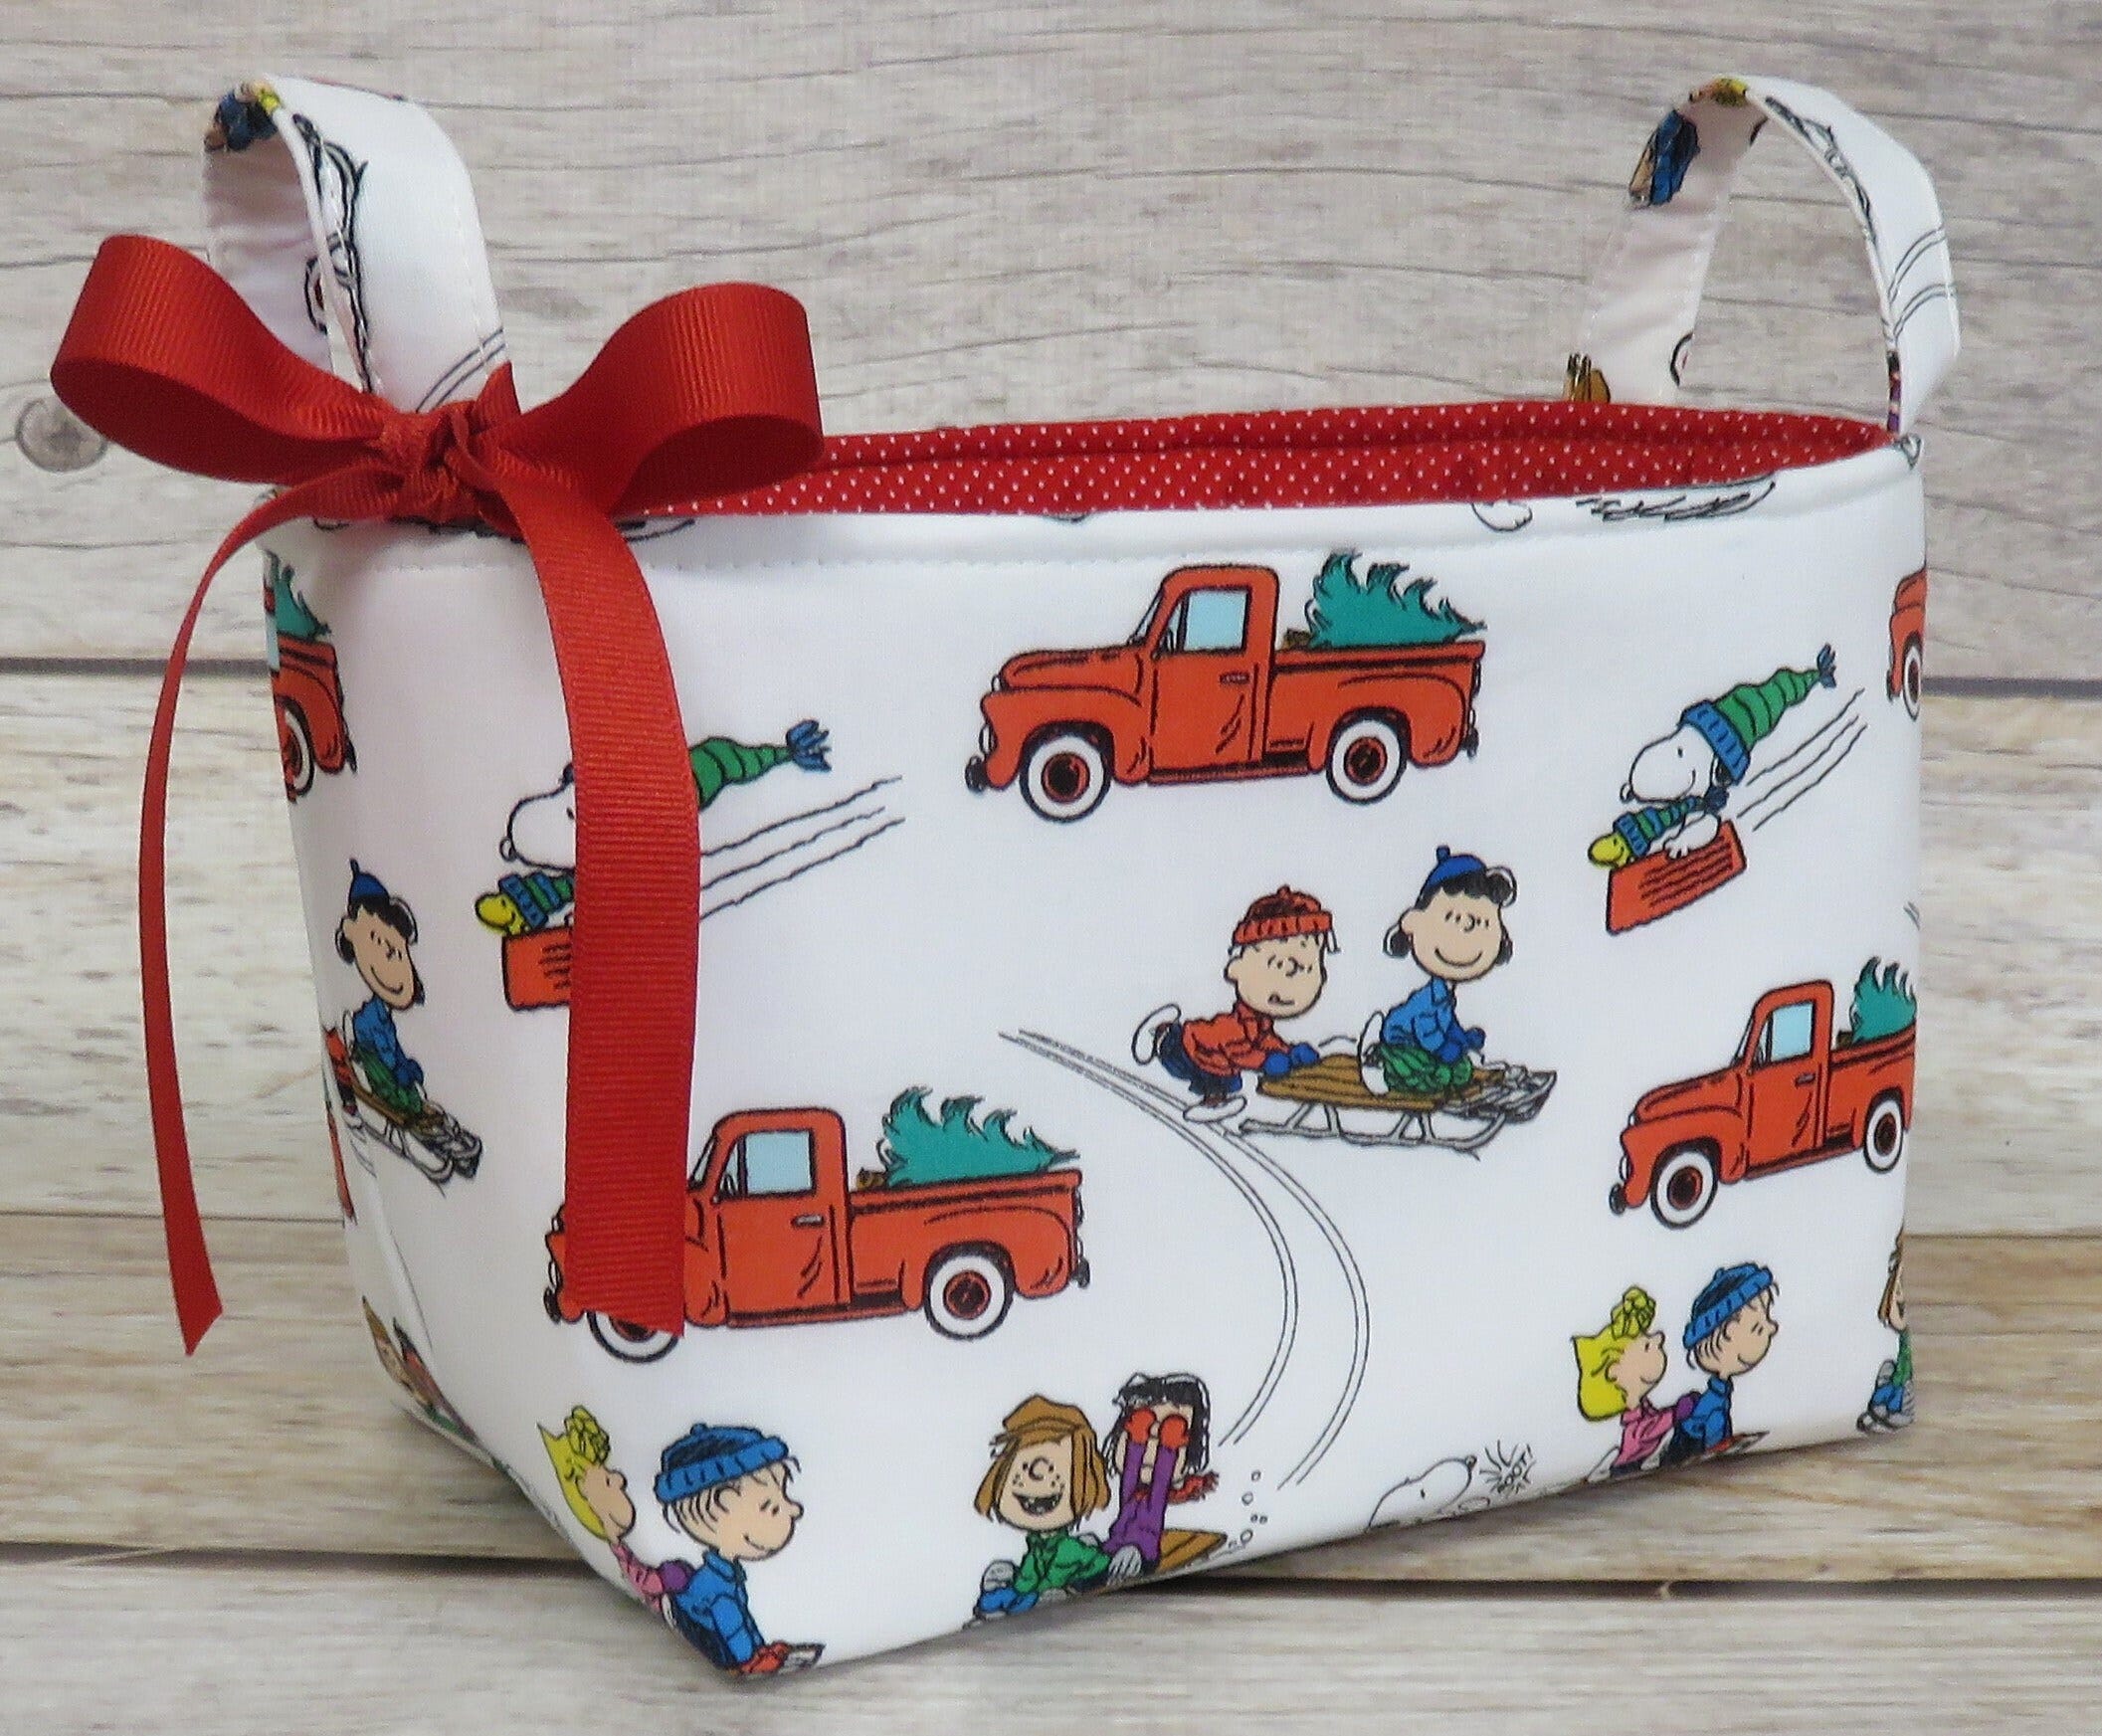 Fabric Storage Organizer Container Bin Basket -  Christmas Peanuts Charlie Brown Snoopy and Friends Red Trucks on White